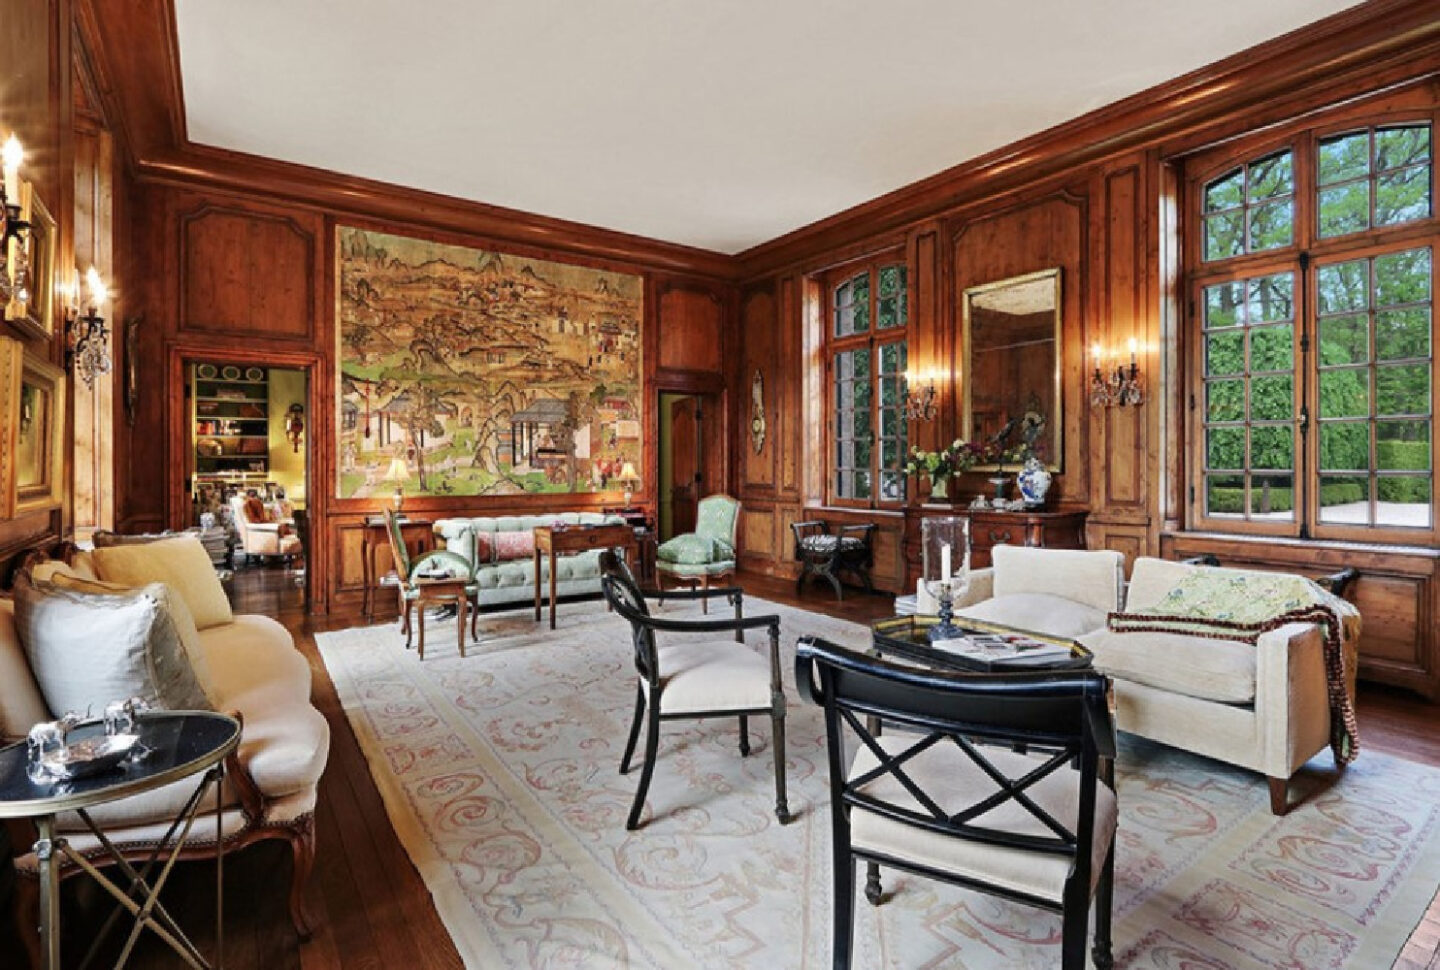 Chinese murals in paneled French country interior. David Adler La Lanterne Mansion is a 1922 historic home in Lake Bluff with French inspired architecture and interiors.